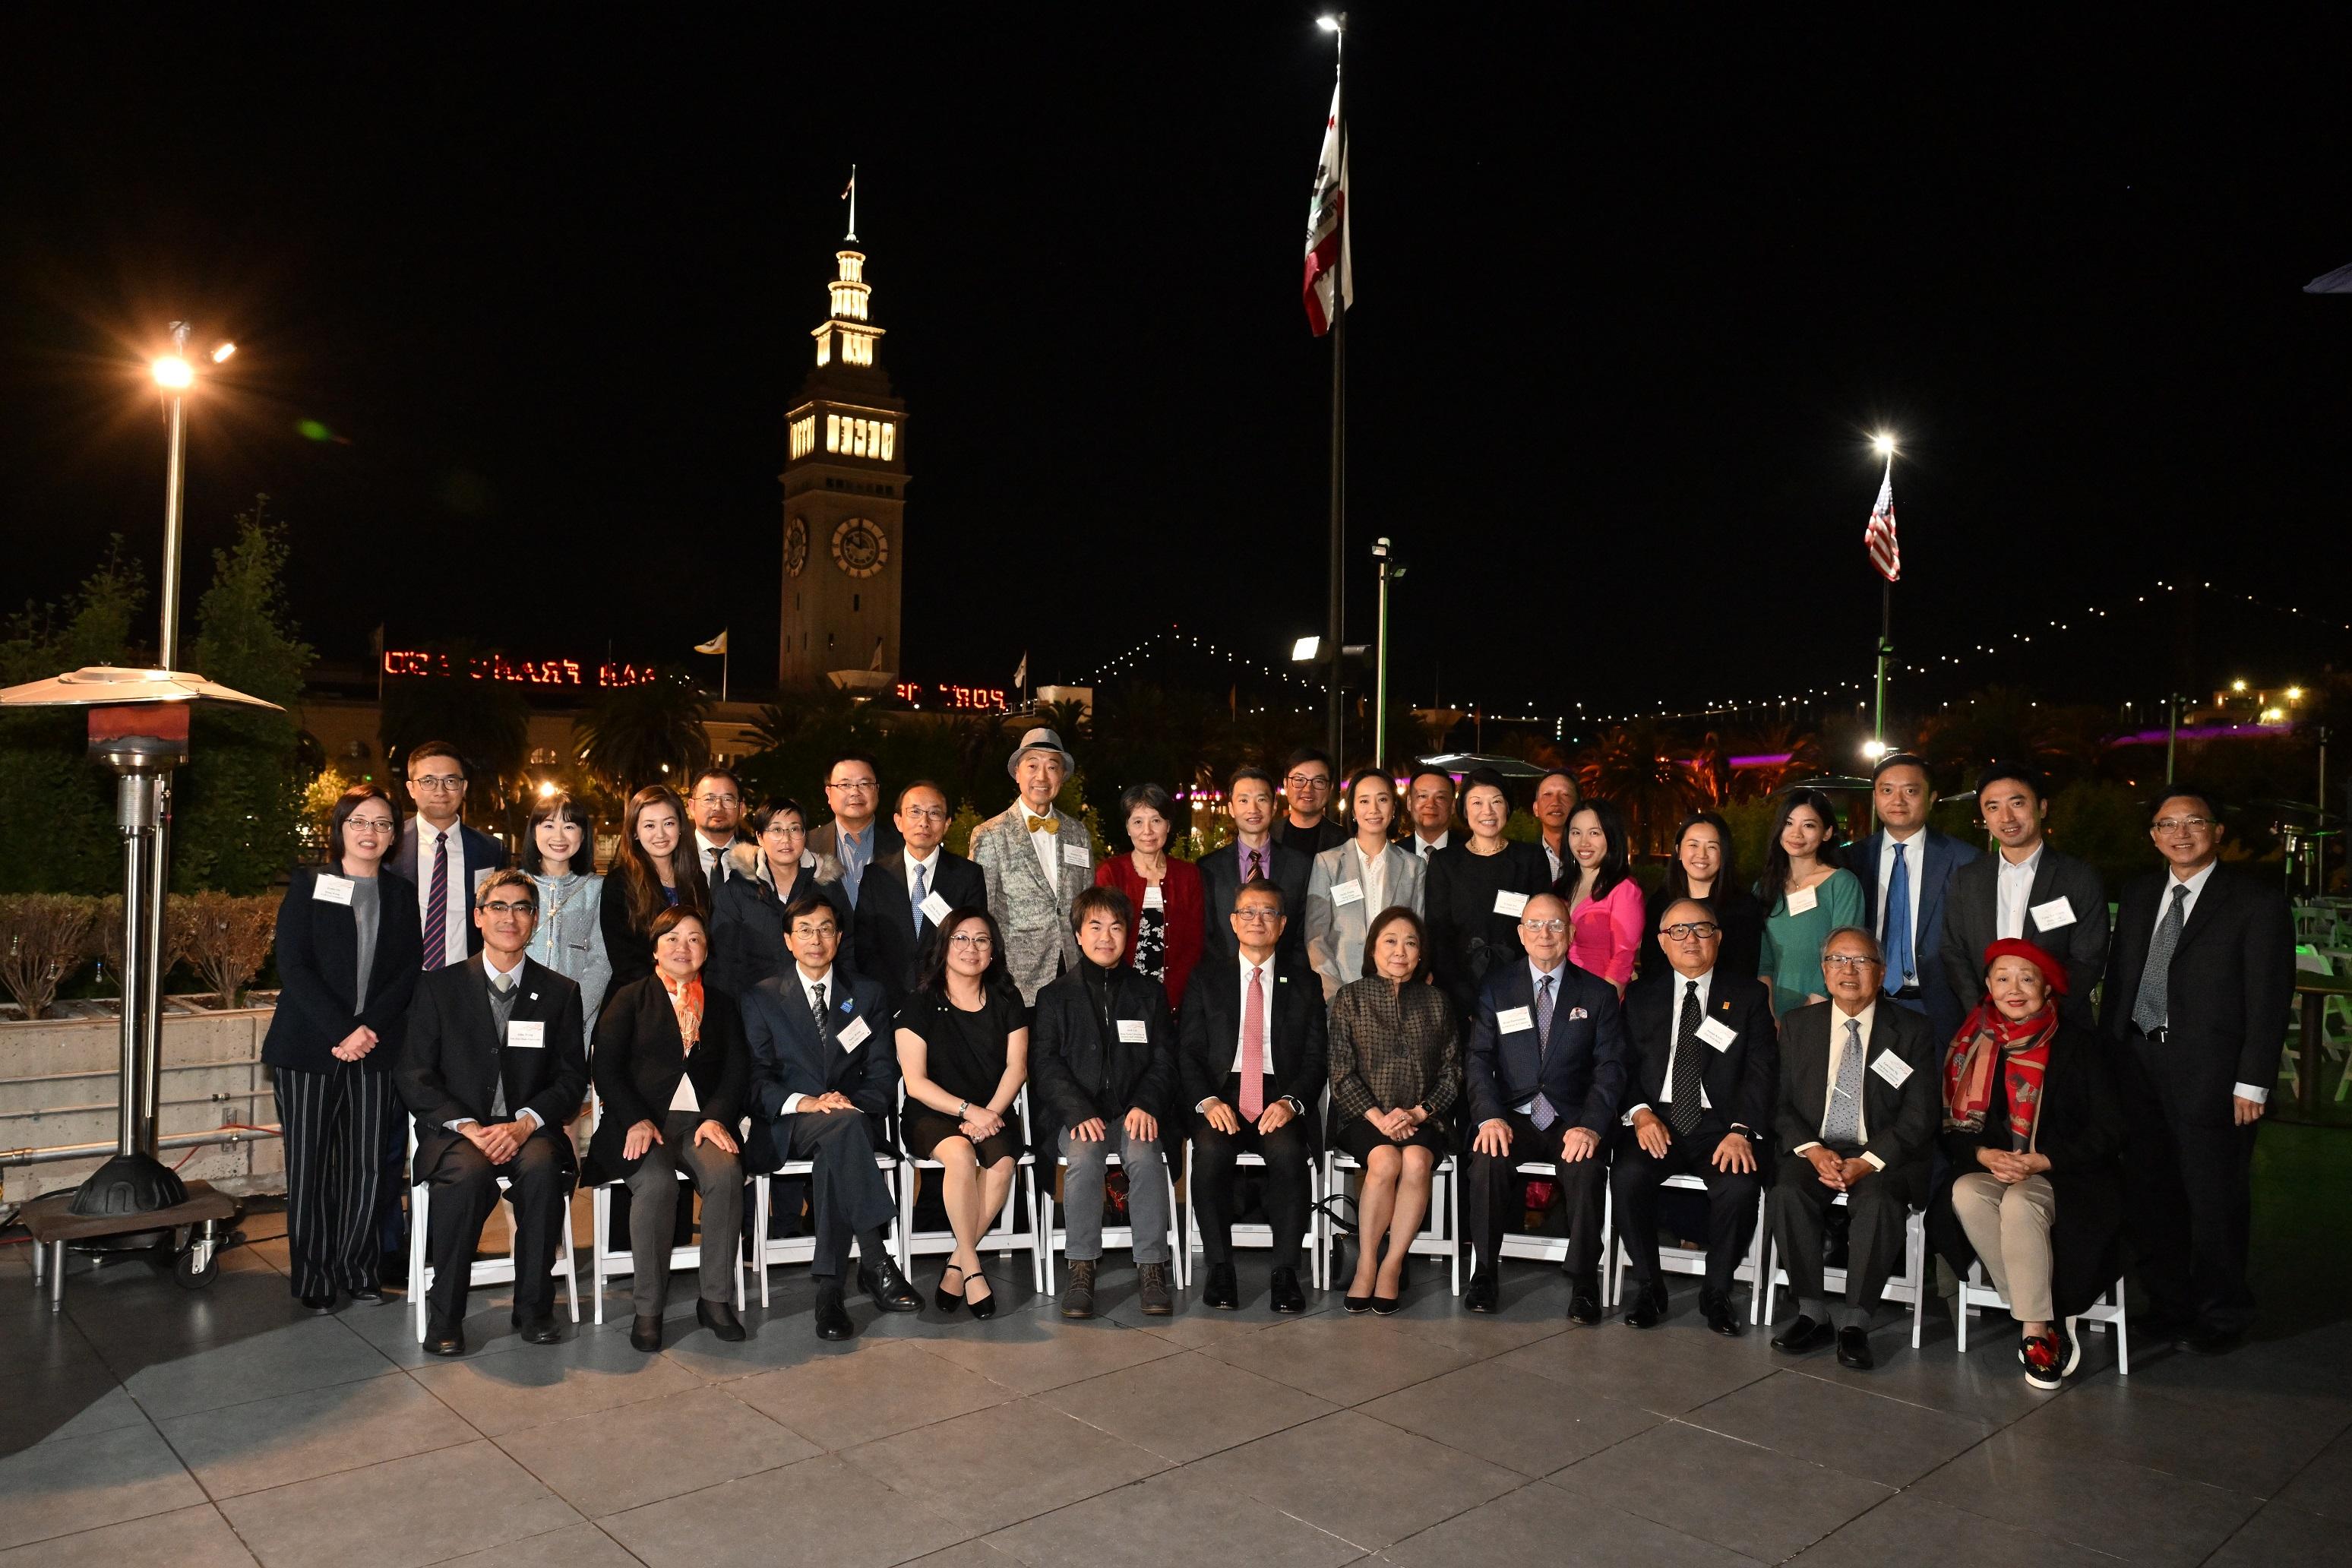 The Financial Secretary, Mr Paul Chan (first row, centre), had dinner with members of the Hong Kong community living in San Francisco, the United States, yesterday night (November 13, San Francisco time). Mr Chan briefed them on the latest developments and opportunities of Hong Kong.